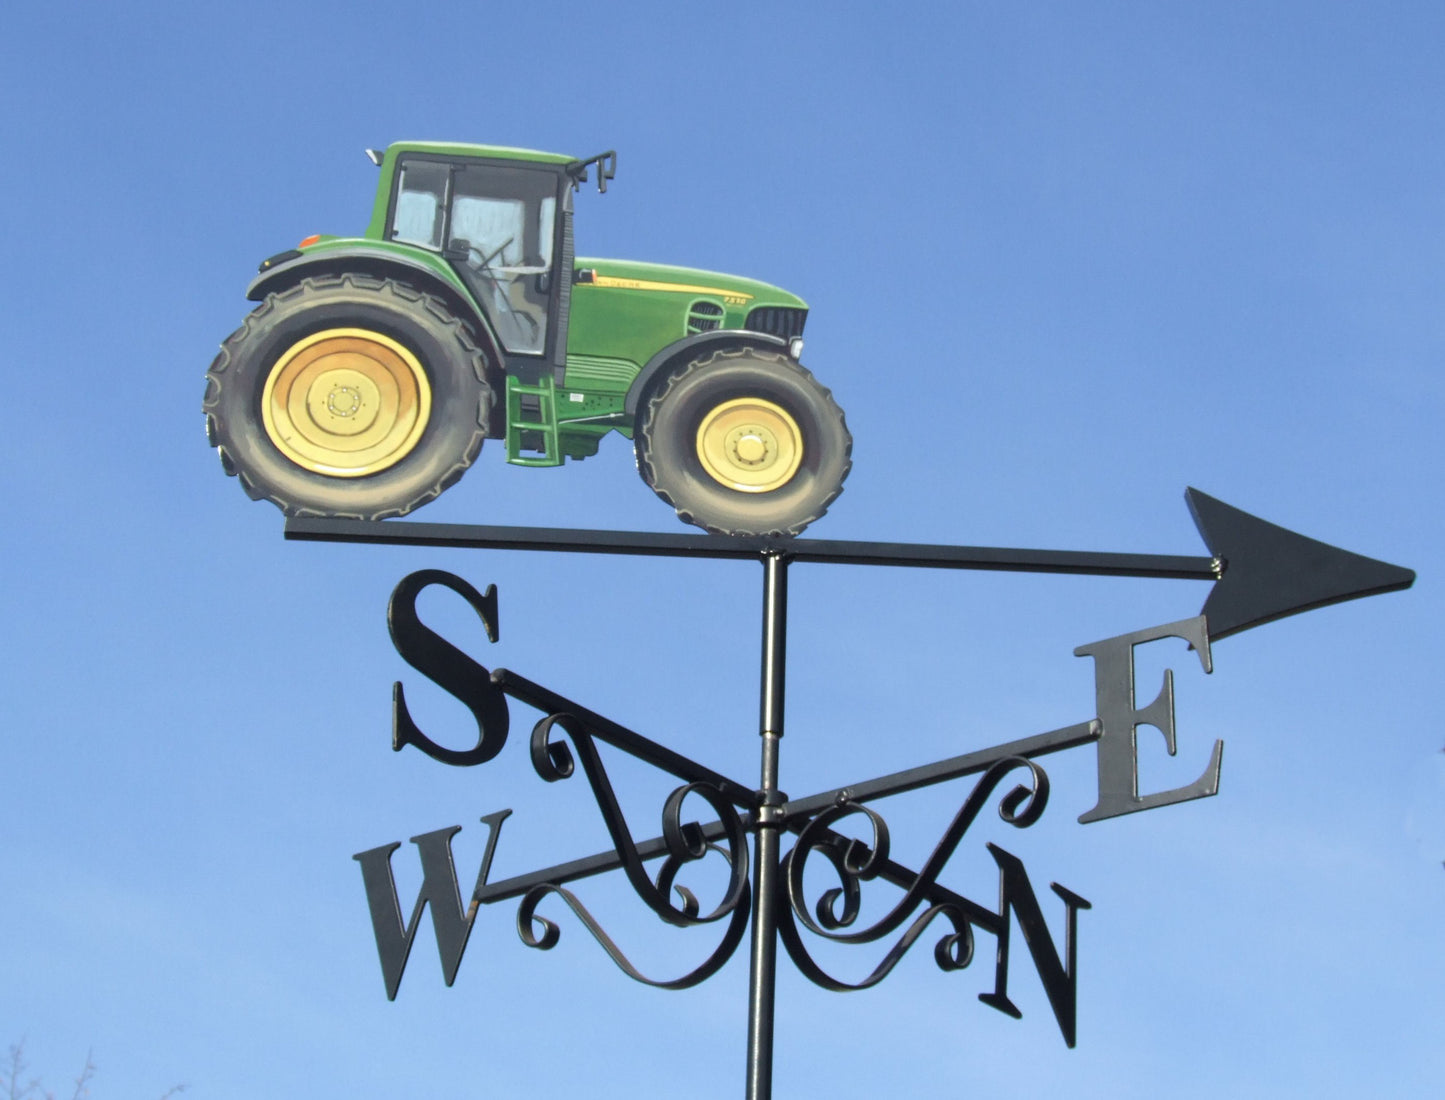 John Deere tractor 7530 weather vane hand painted right side